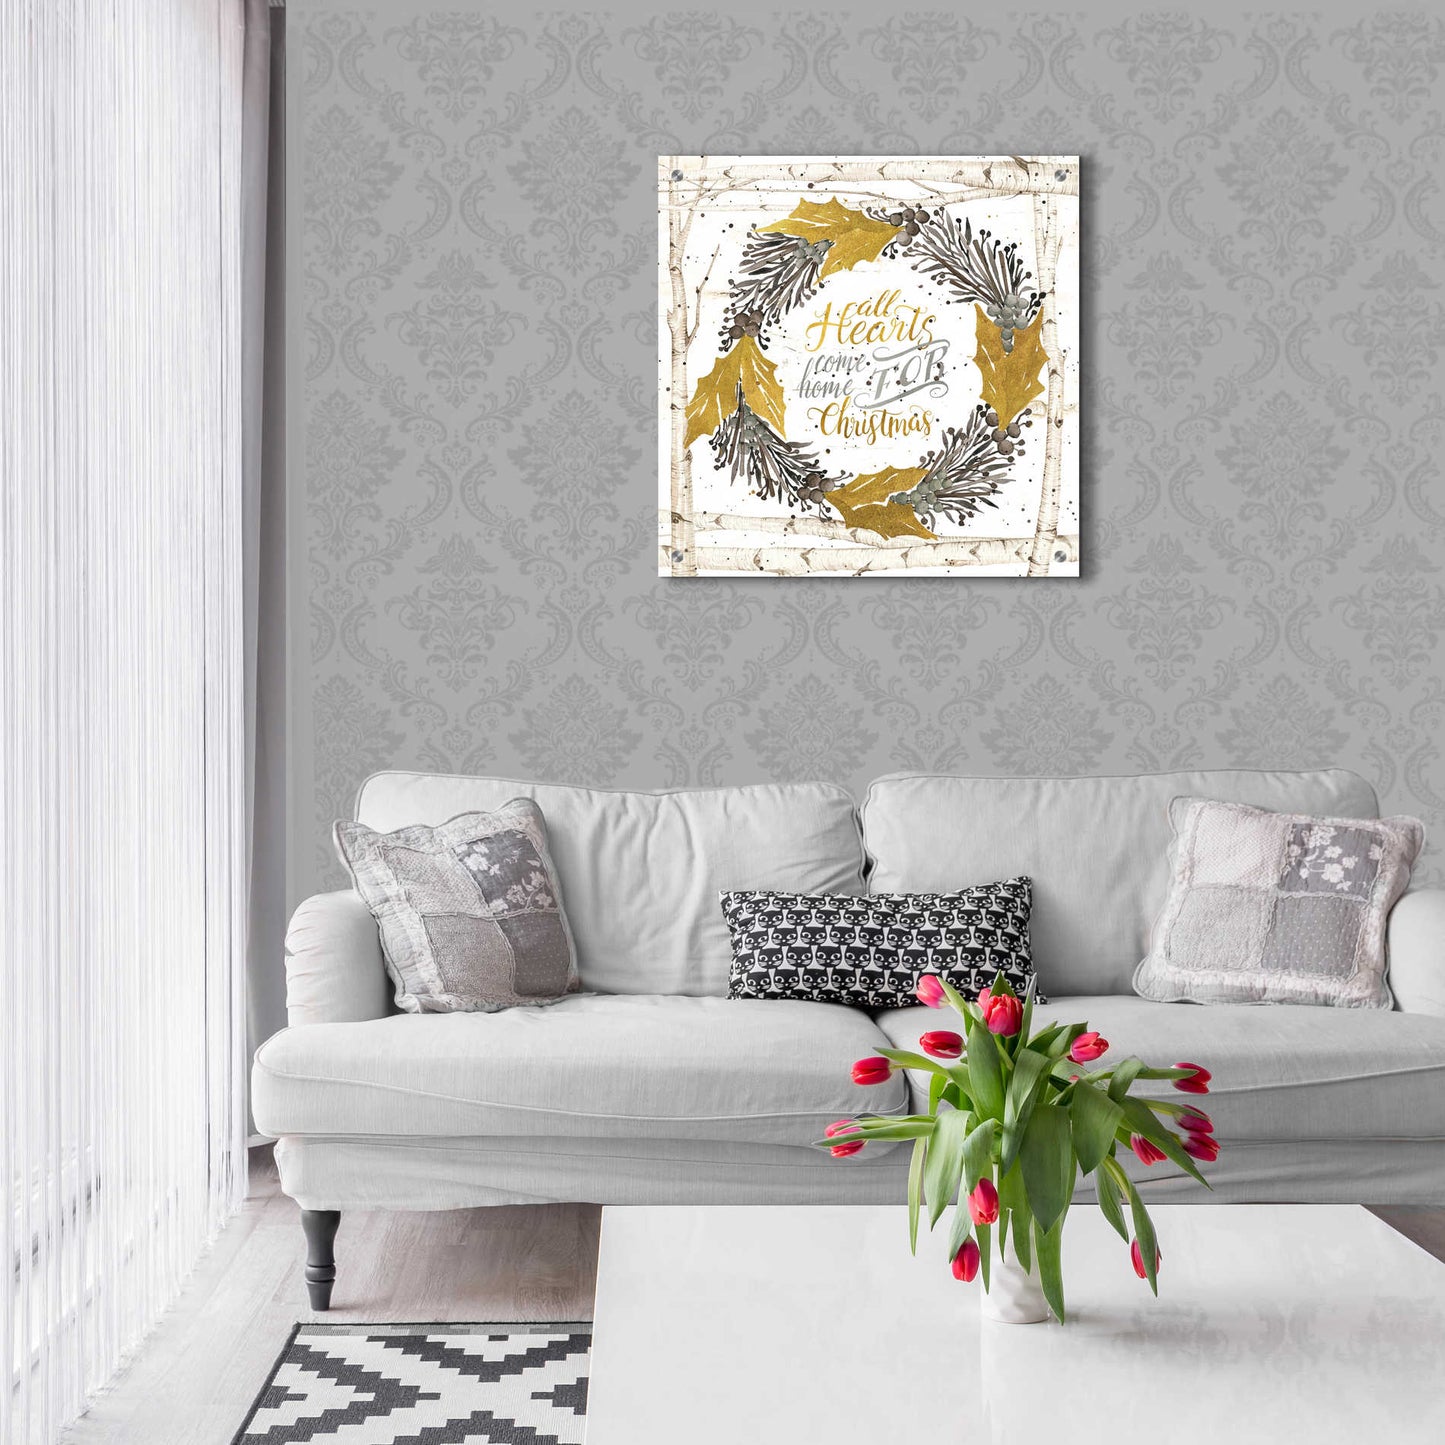 Epic Art 'All Hearts Come Home for Christmas Birch Wreath' by Cindy Jacobs, Acrylic Glass Wall Art,24x24